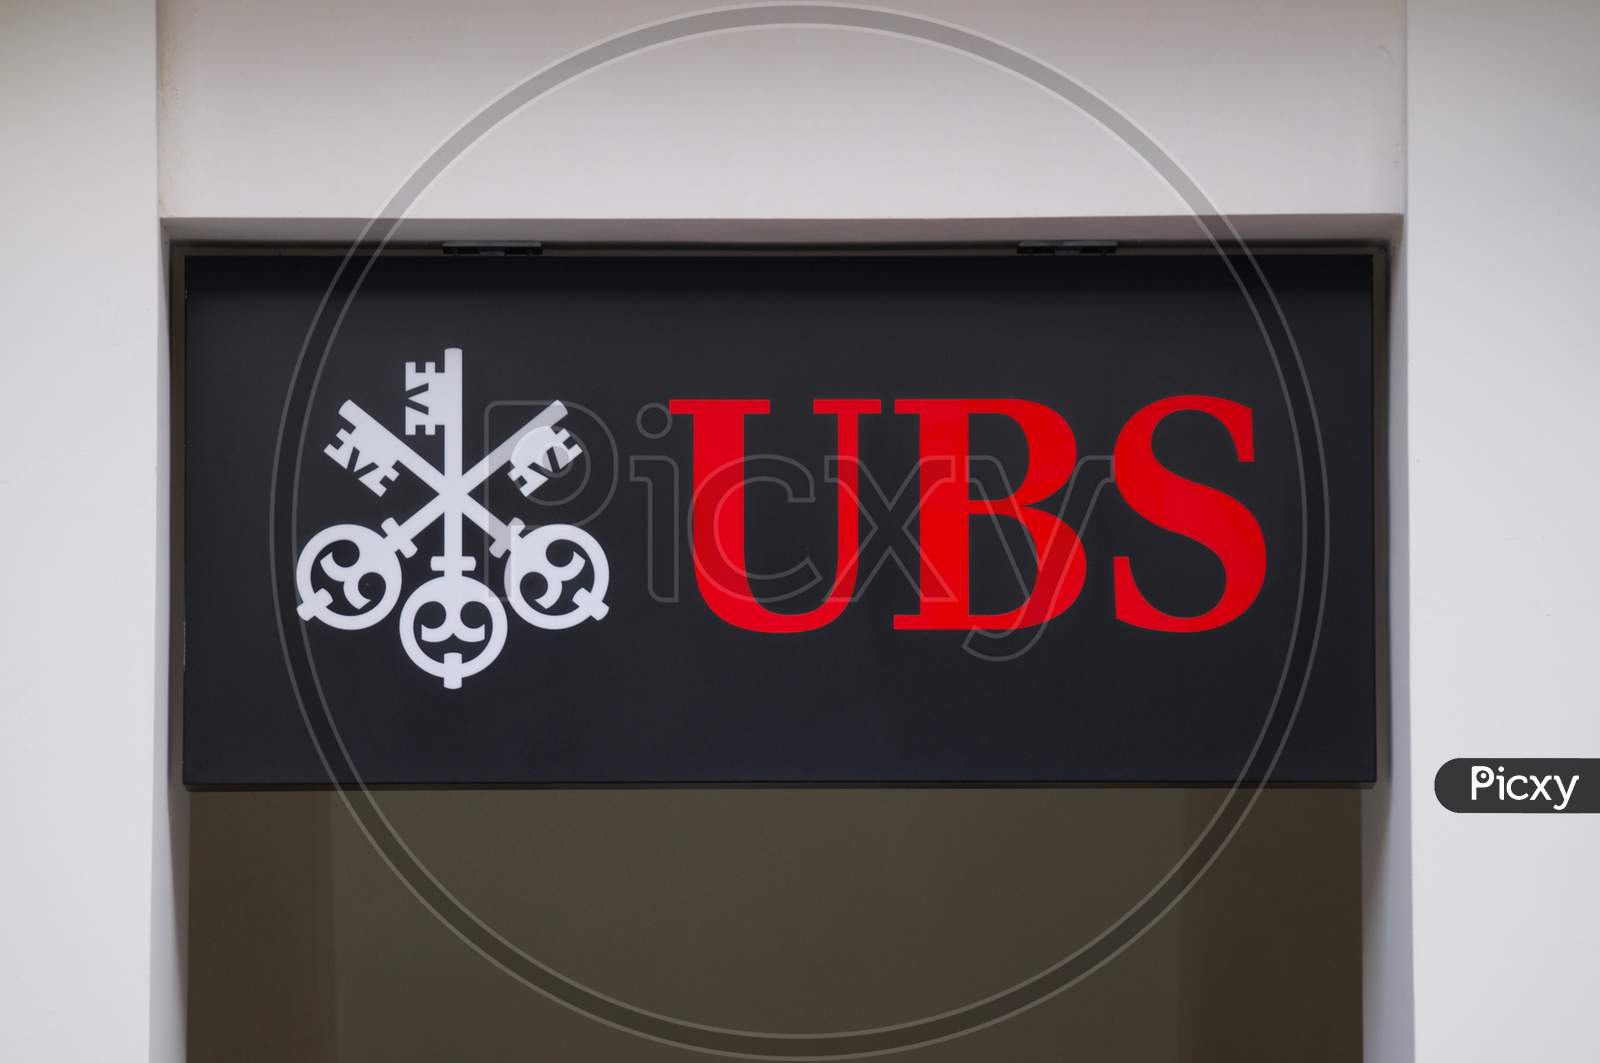 Ubs Bank Sign Haning On A Building In Lugano